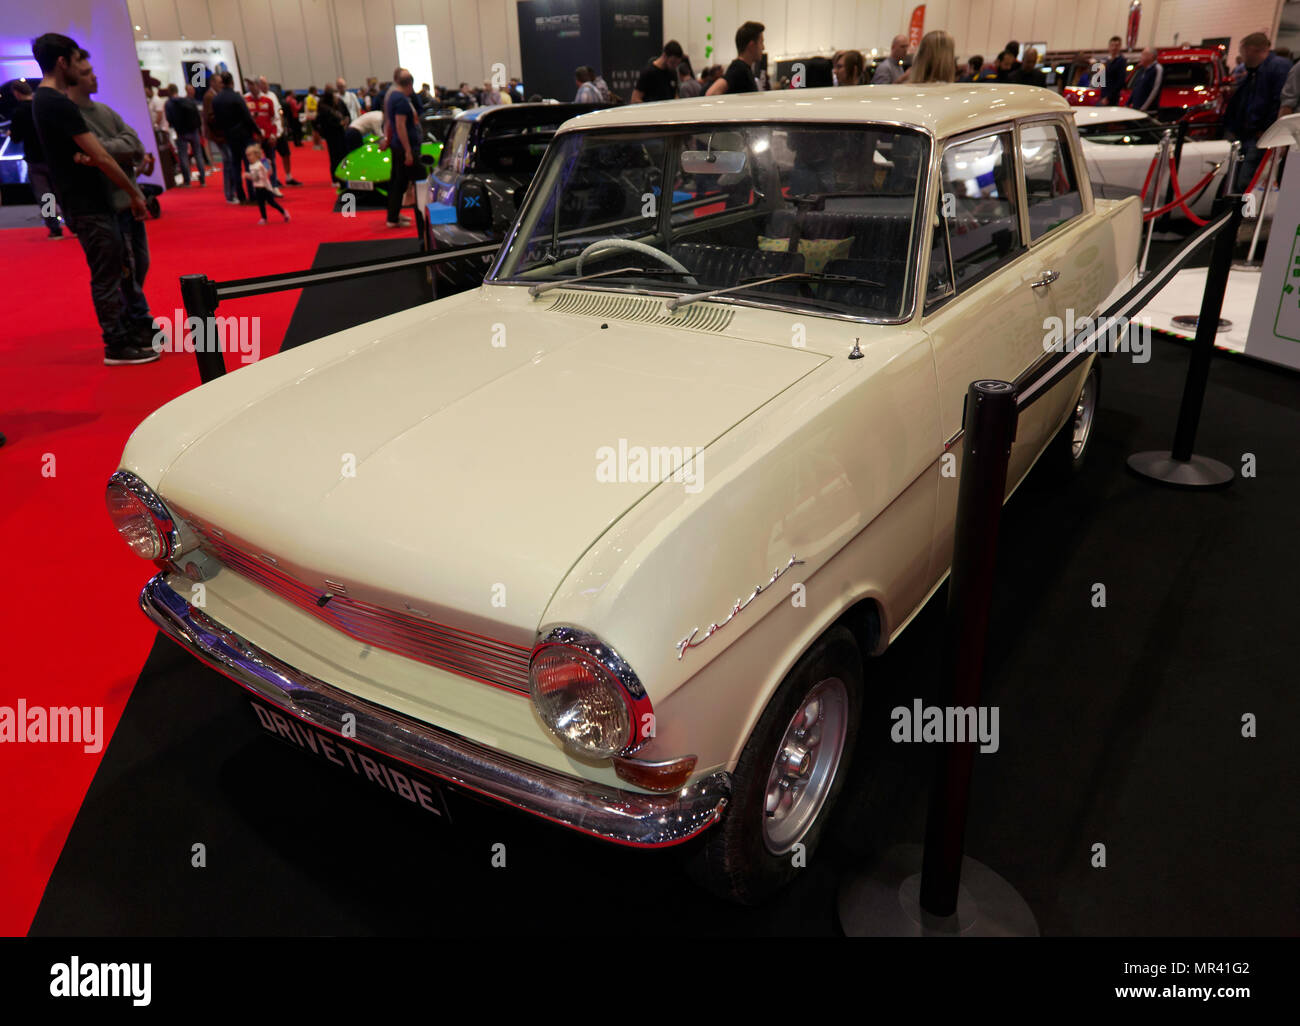 Richard Hammond's 1963 Opel Kadett which he drove in the Top Gear Botswana  Special, on display at the DRIVETRIBE stand of the 2018 London Motor Show  Stock Photo - Alamy